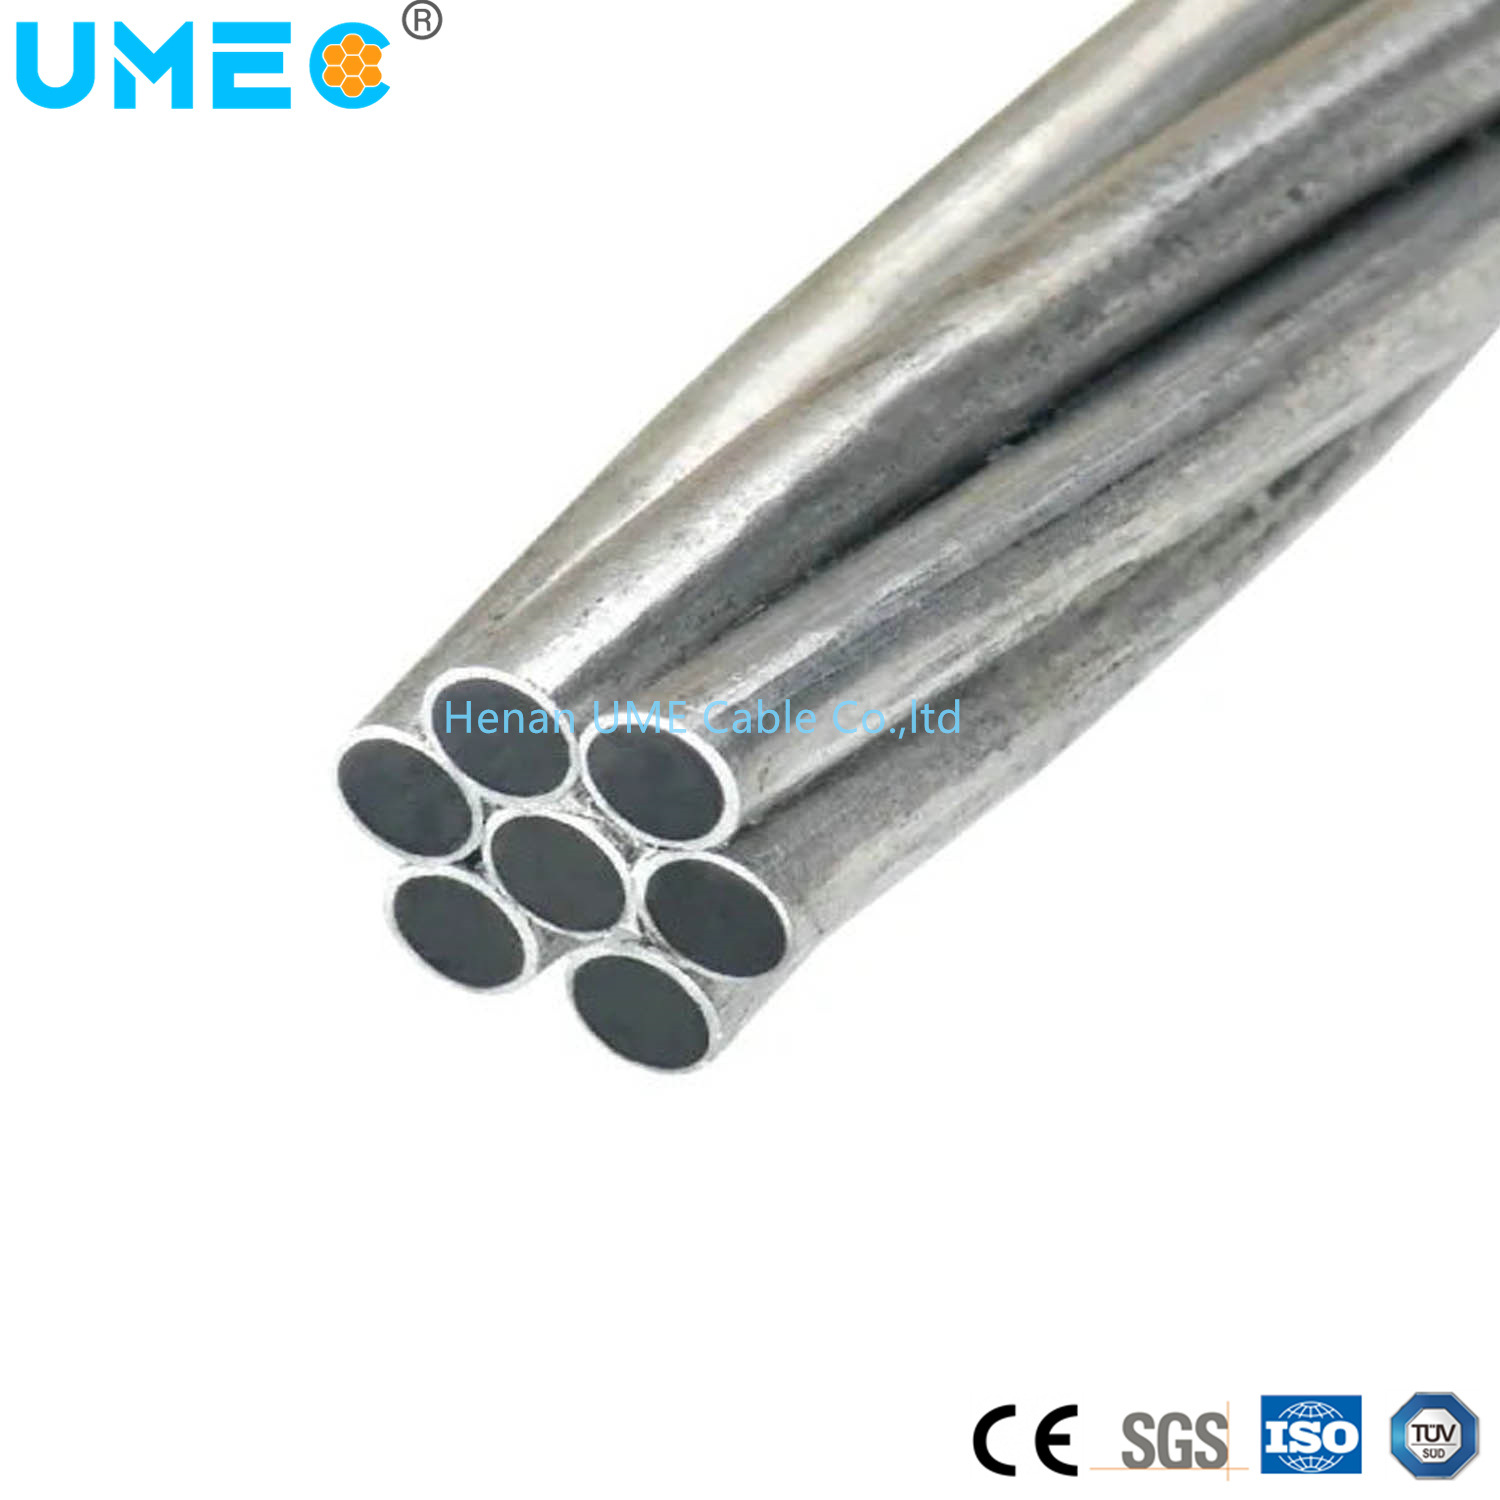 Aluminum Clad Steel Overhead Ground Wire Alumoweld Cable ACSR/Aw Wire #7#8#9